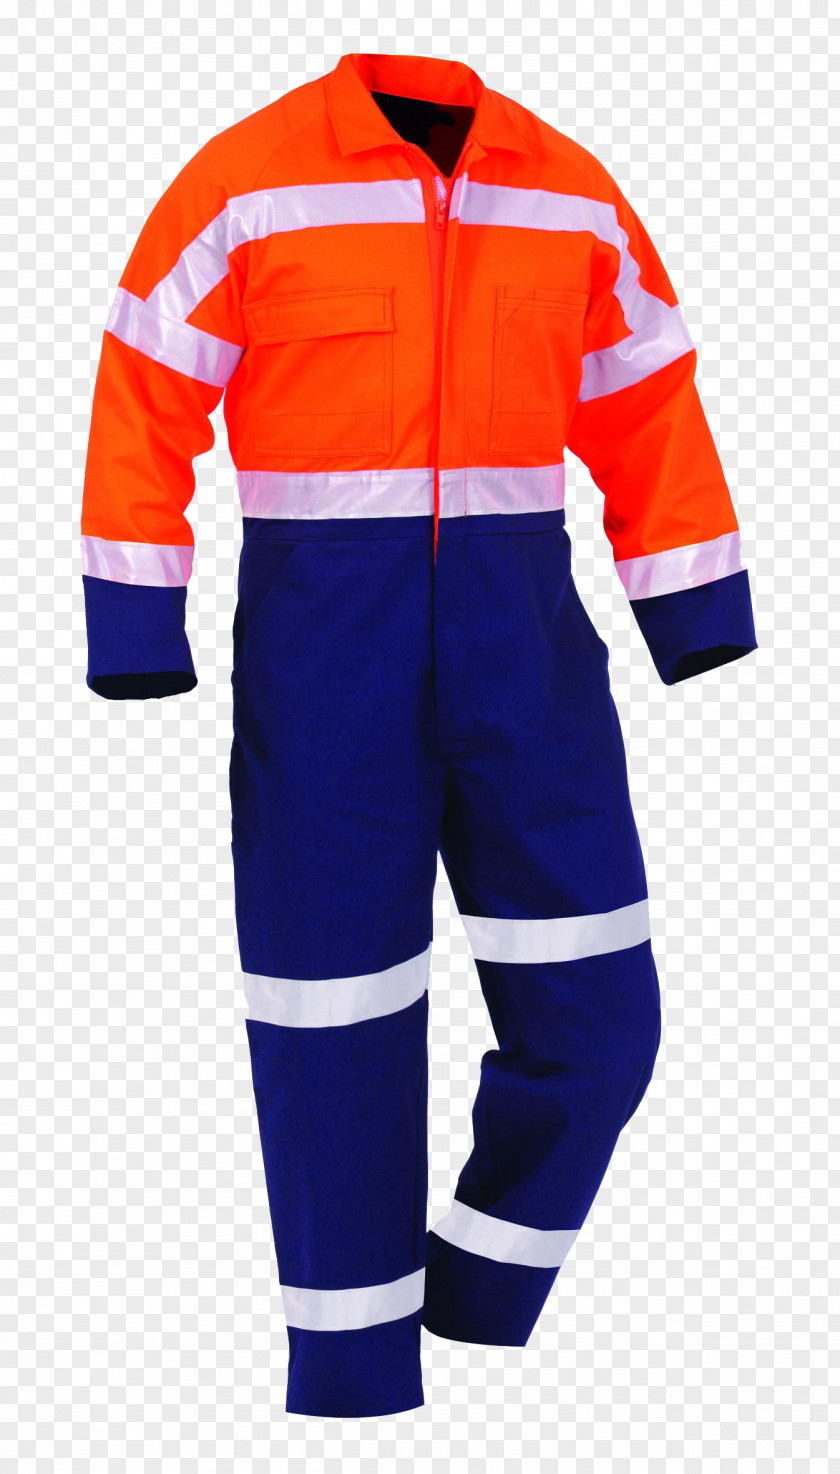 Overalls Overall Workwear Industry Uniform Clothing PNG